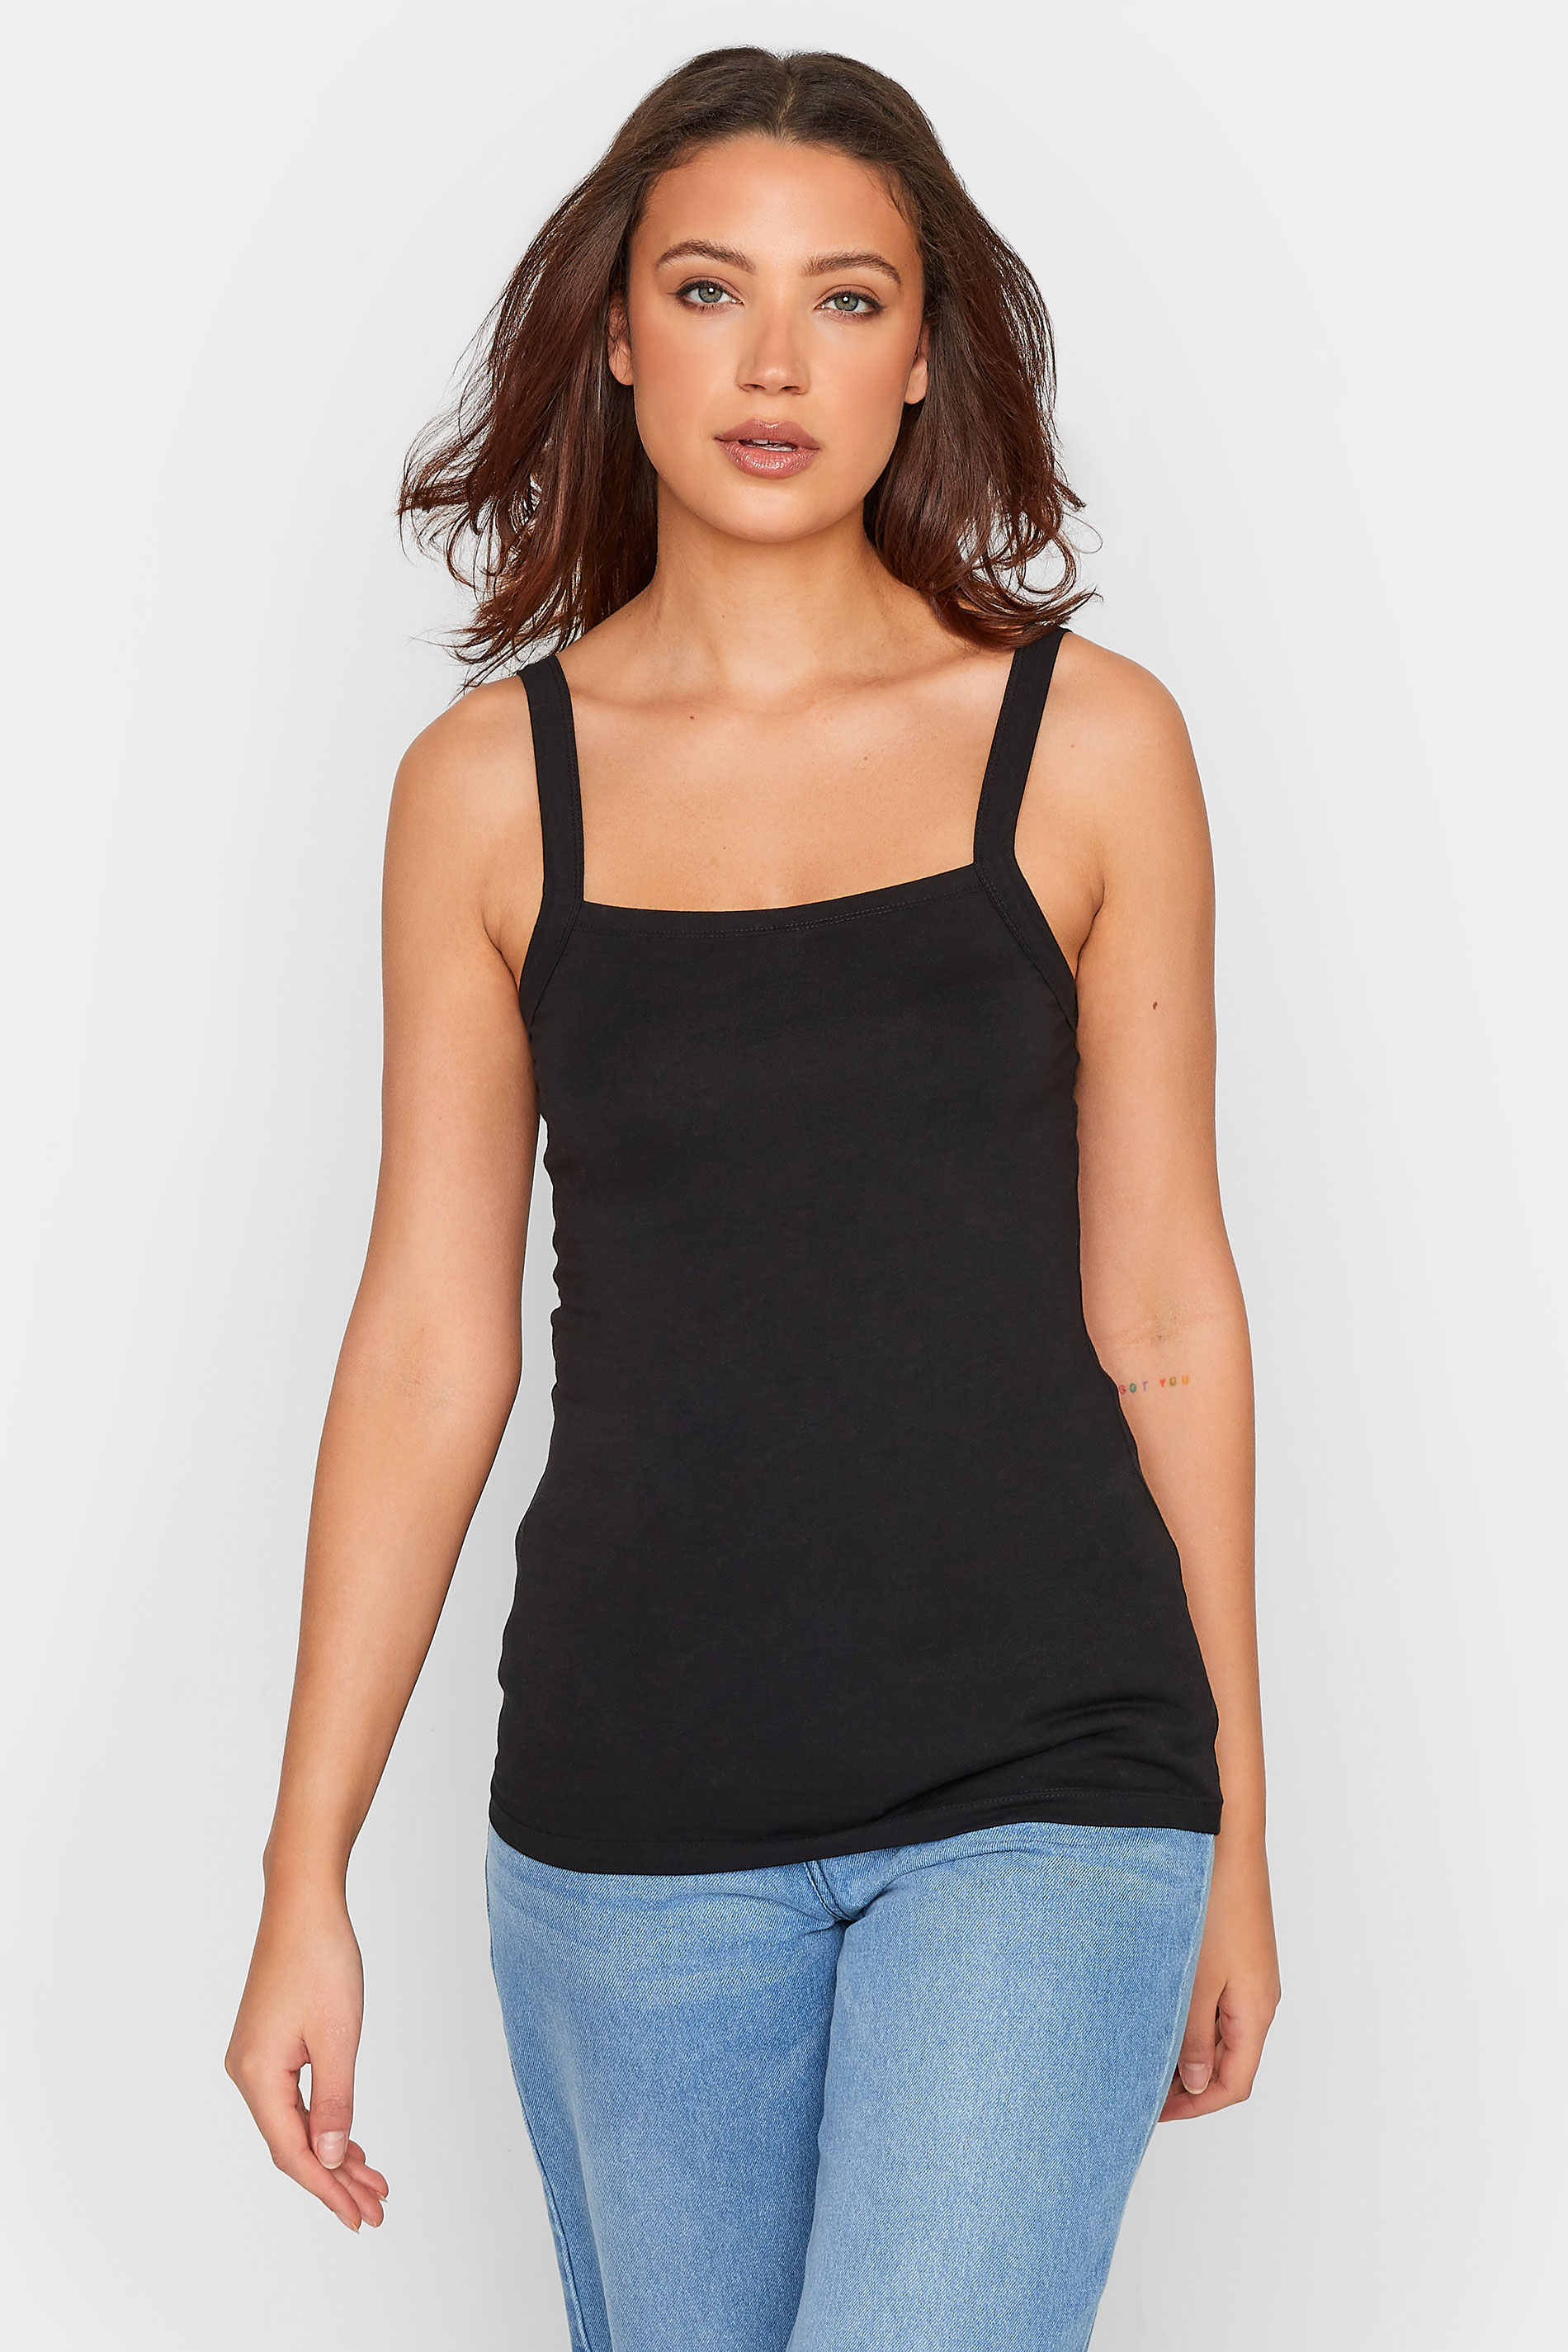 LTS Tall Women's Black Square Neck Vest Top | Long Tall Sally 1